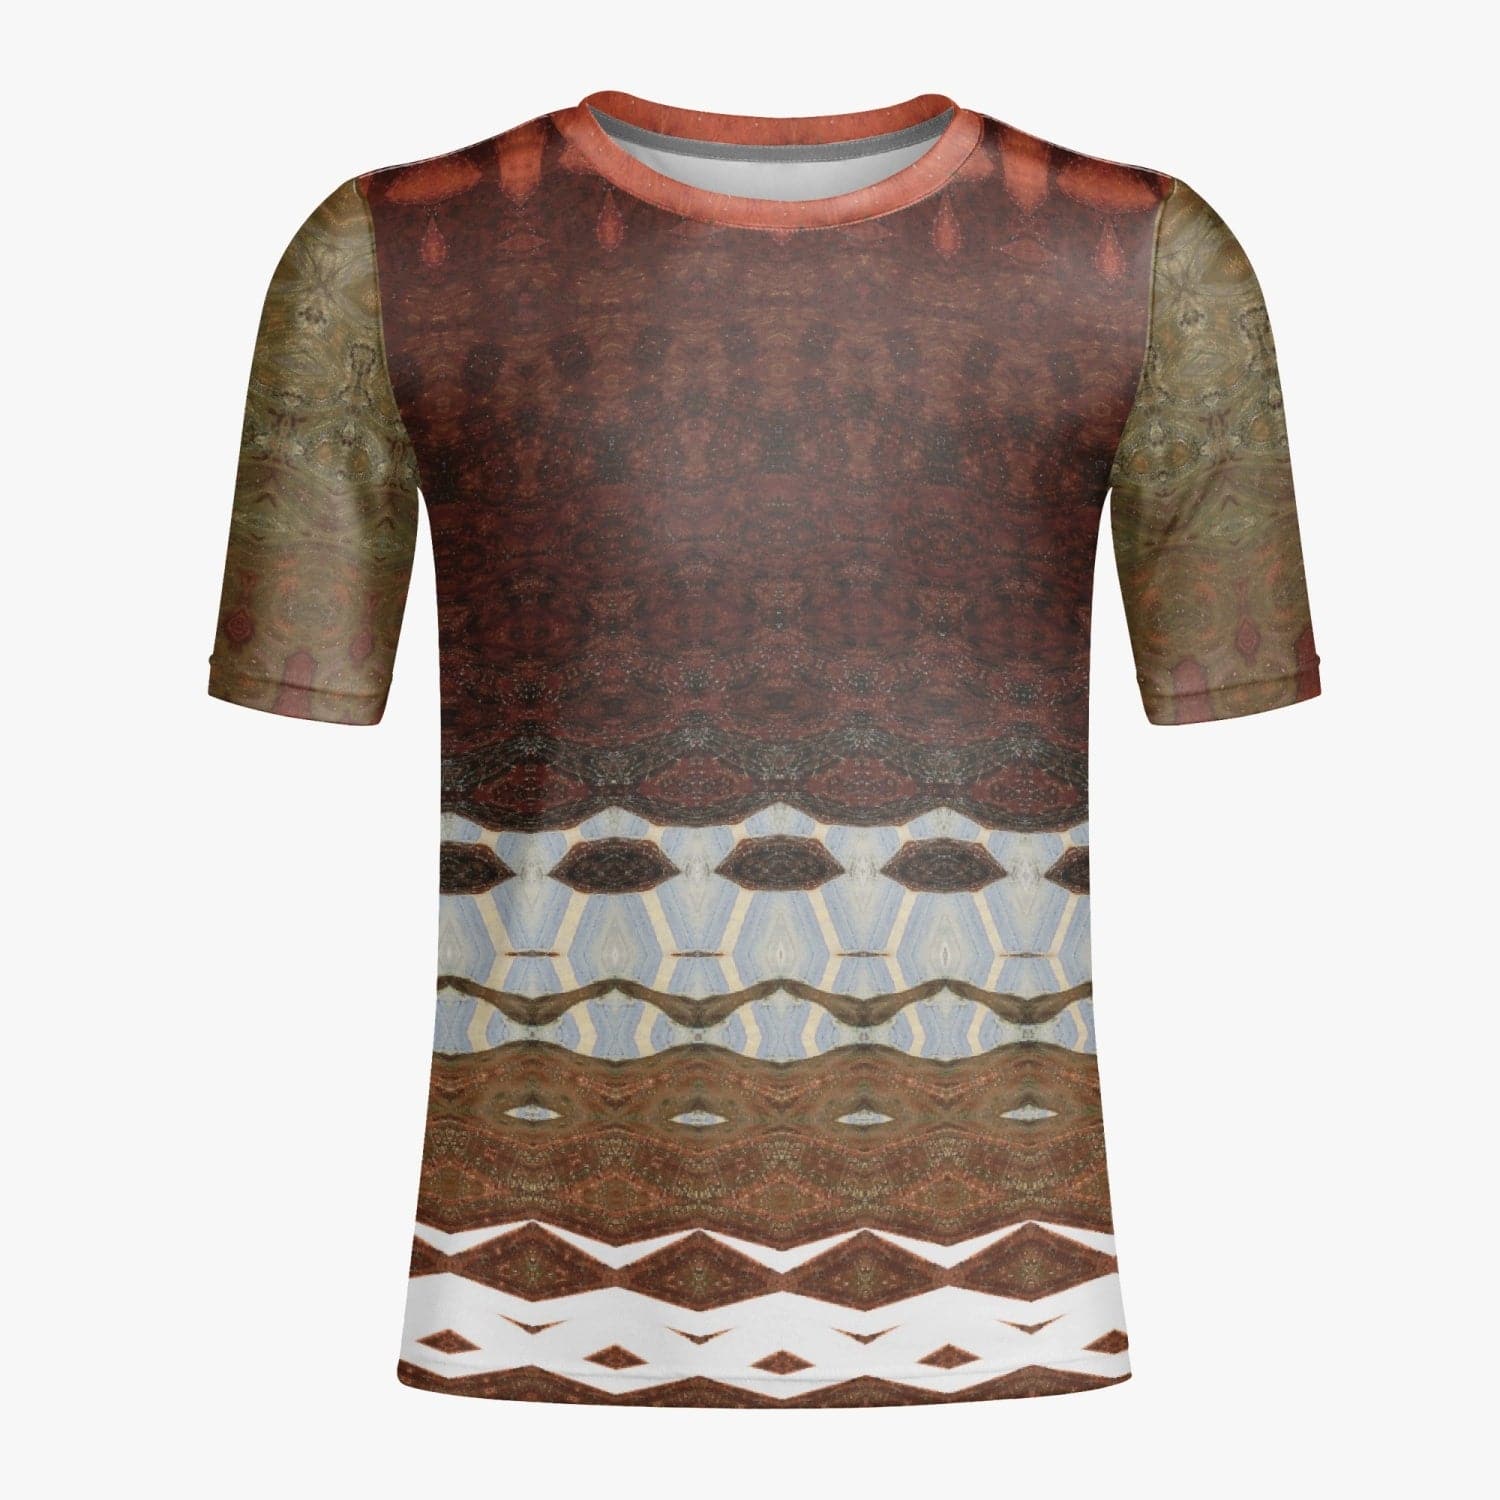 Sensus Studio Designed Handmade Brown T-shirt with Grey and White Elements